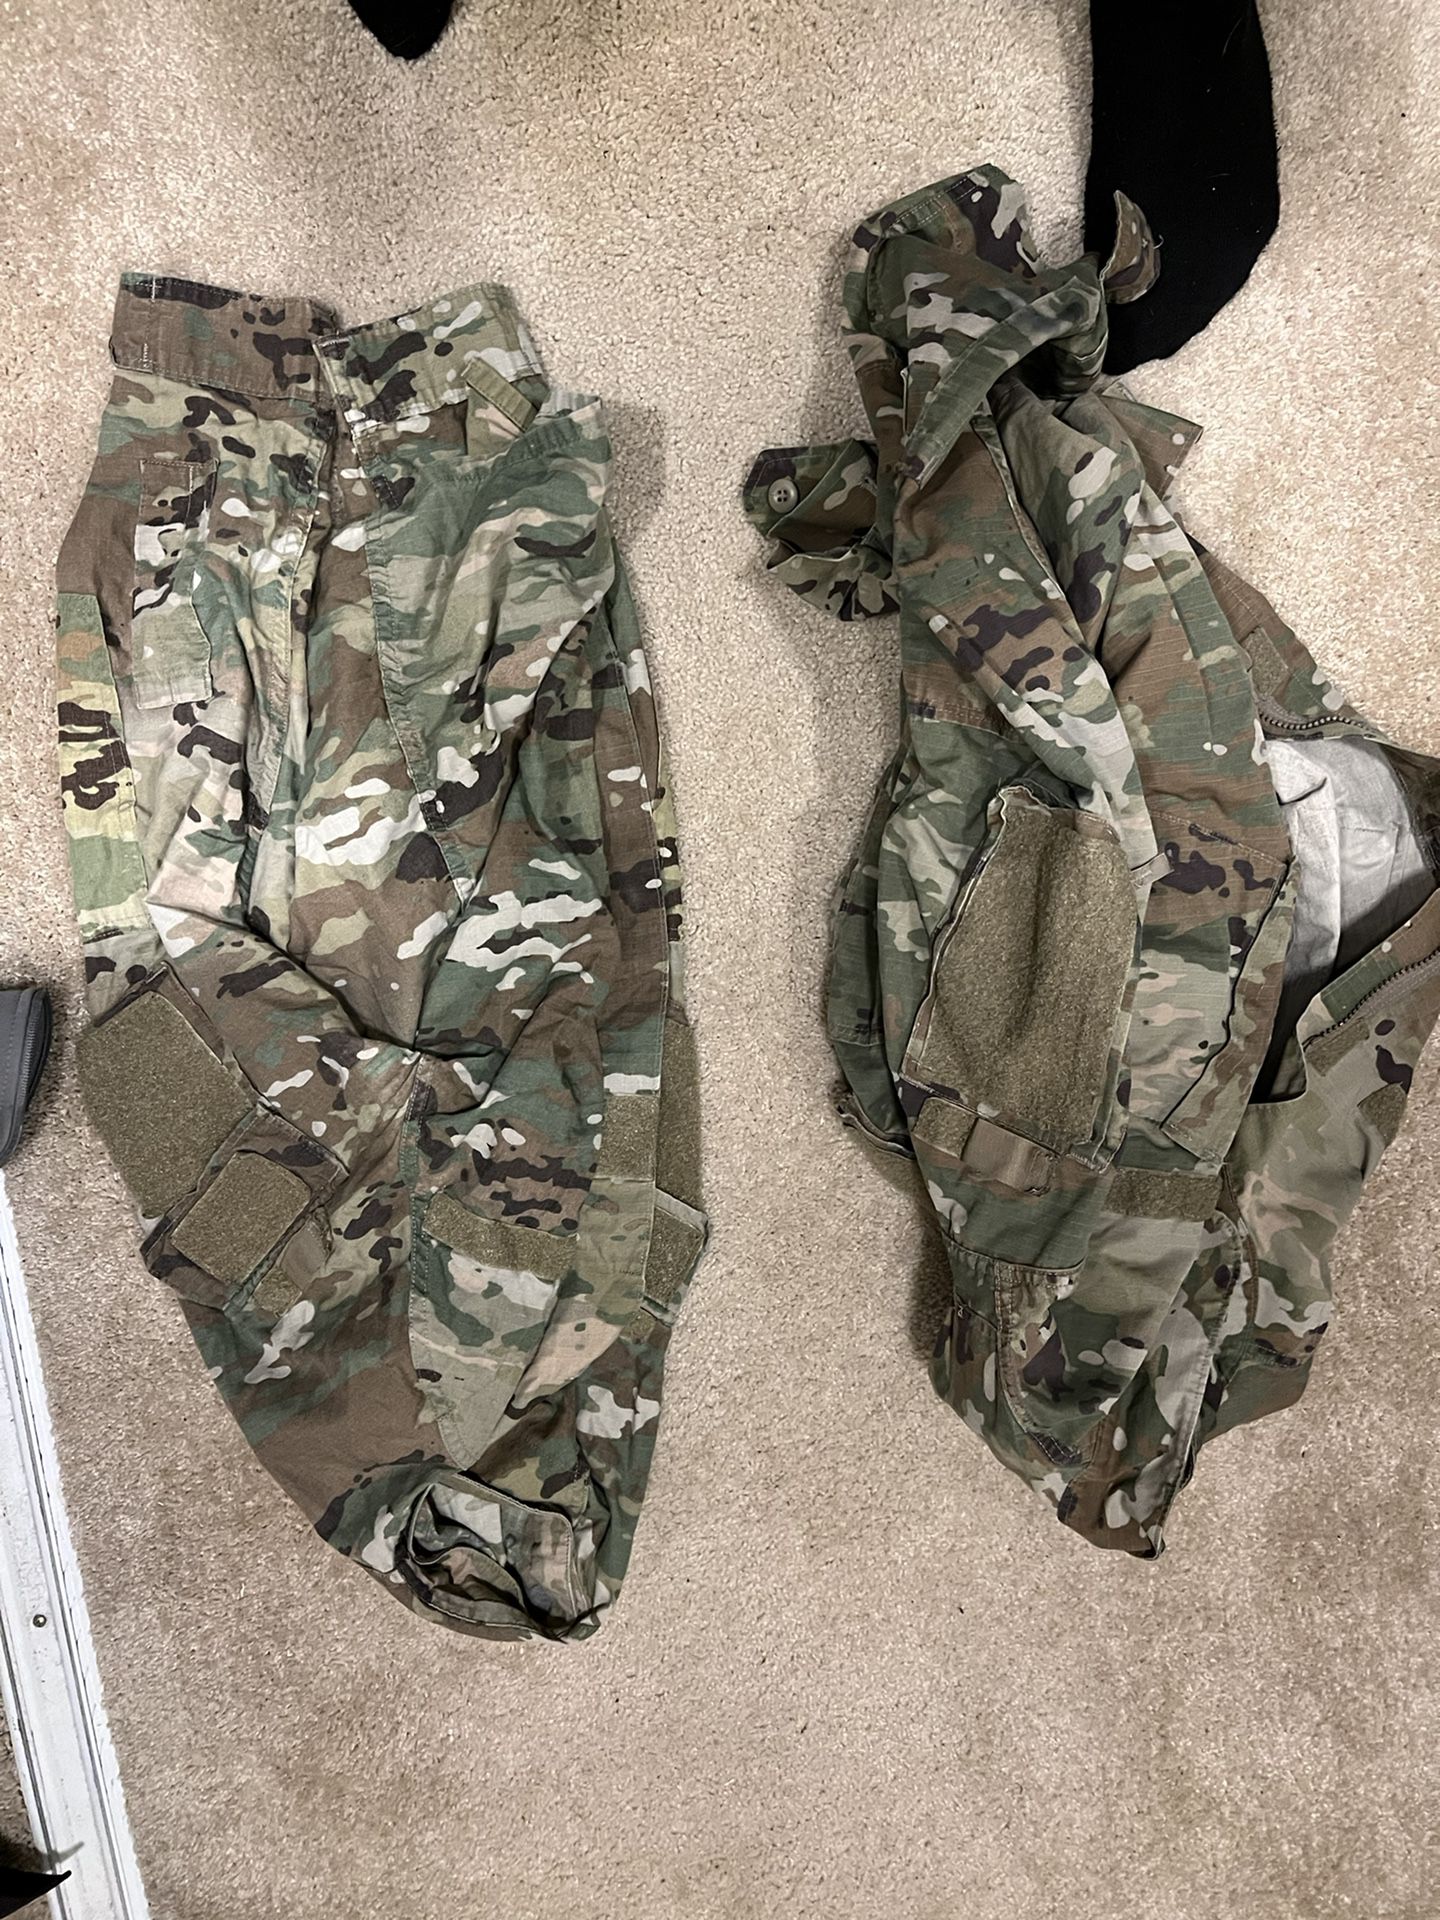 Army Cammies $40 For Both.